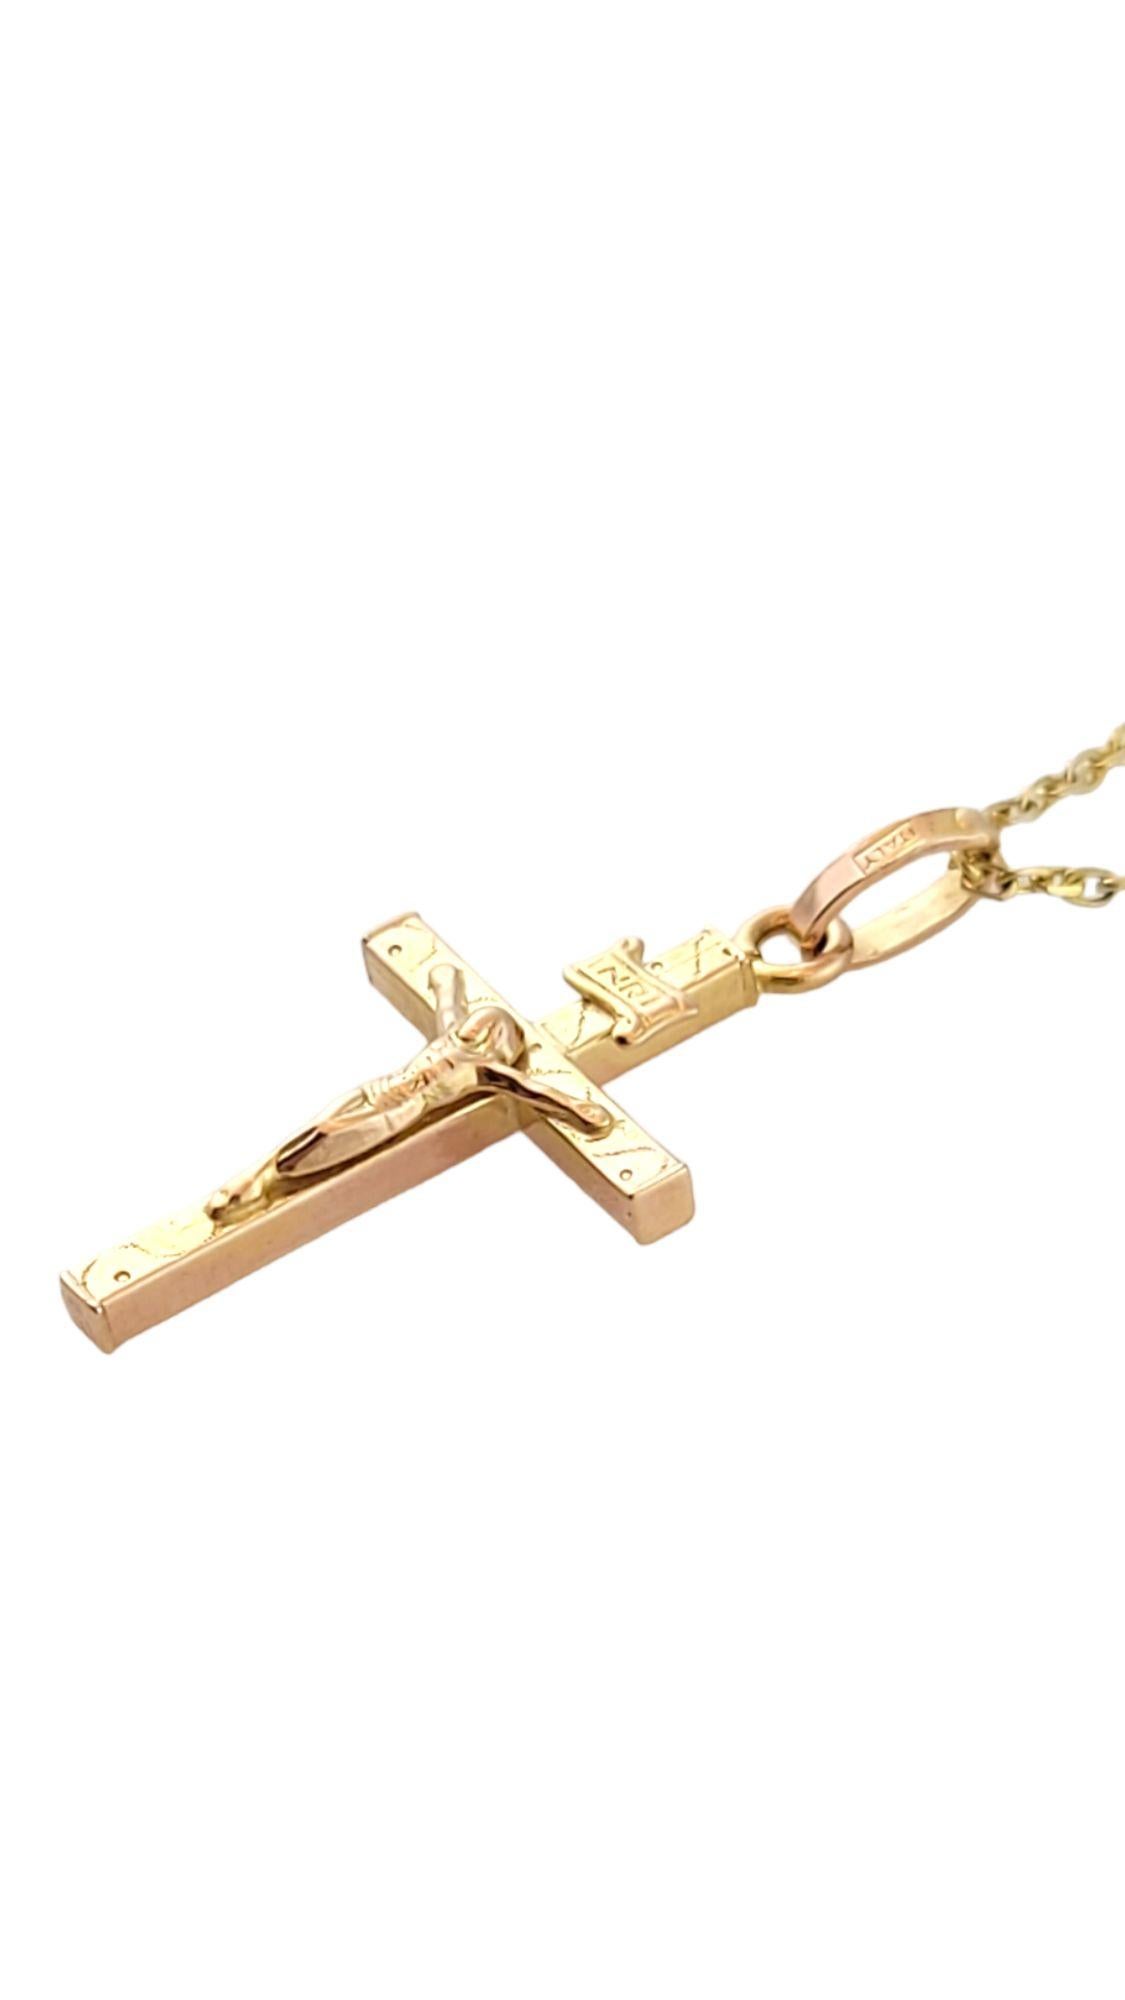 This pendant features a crucifix with 